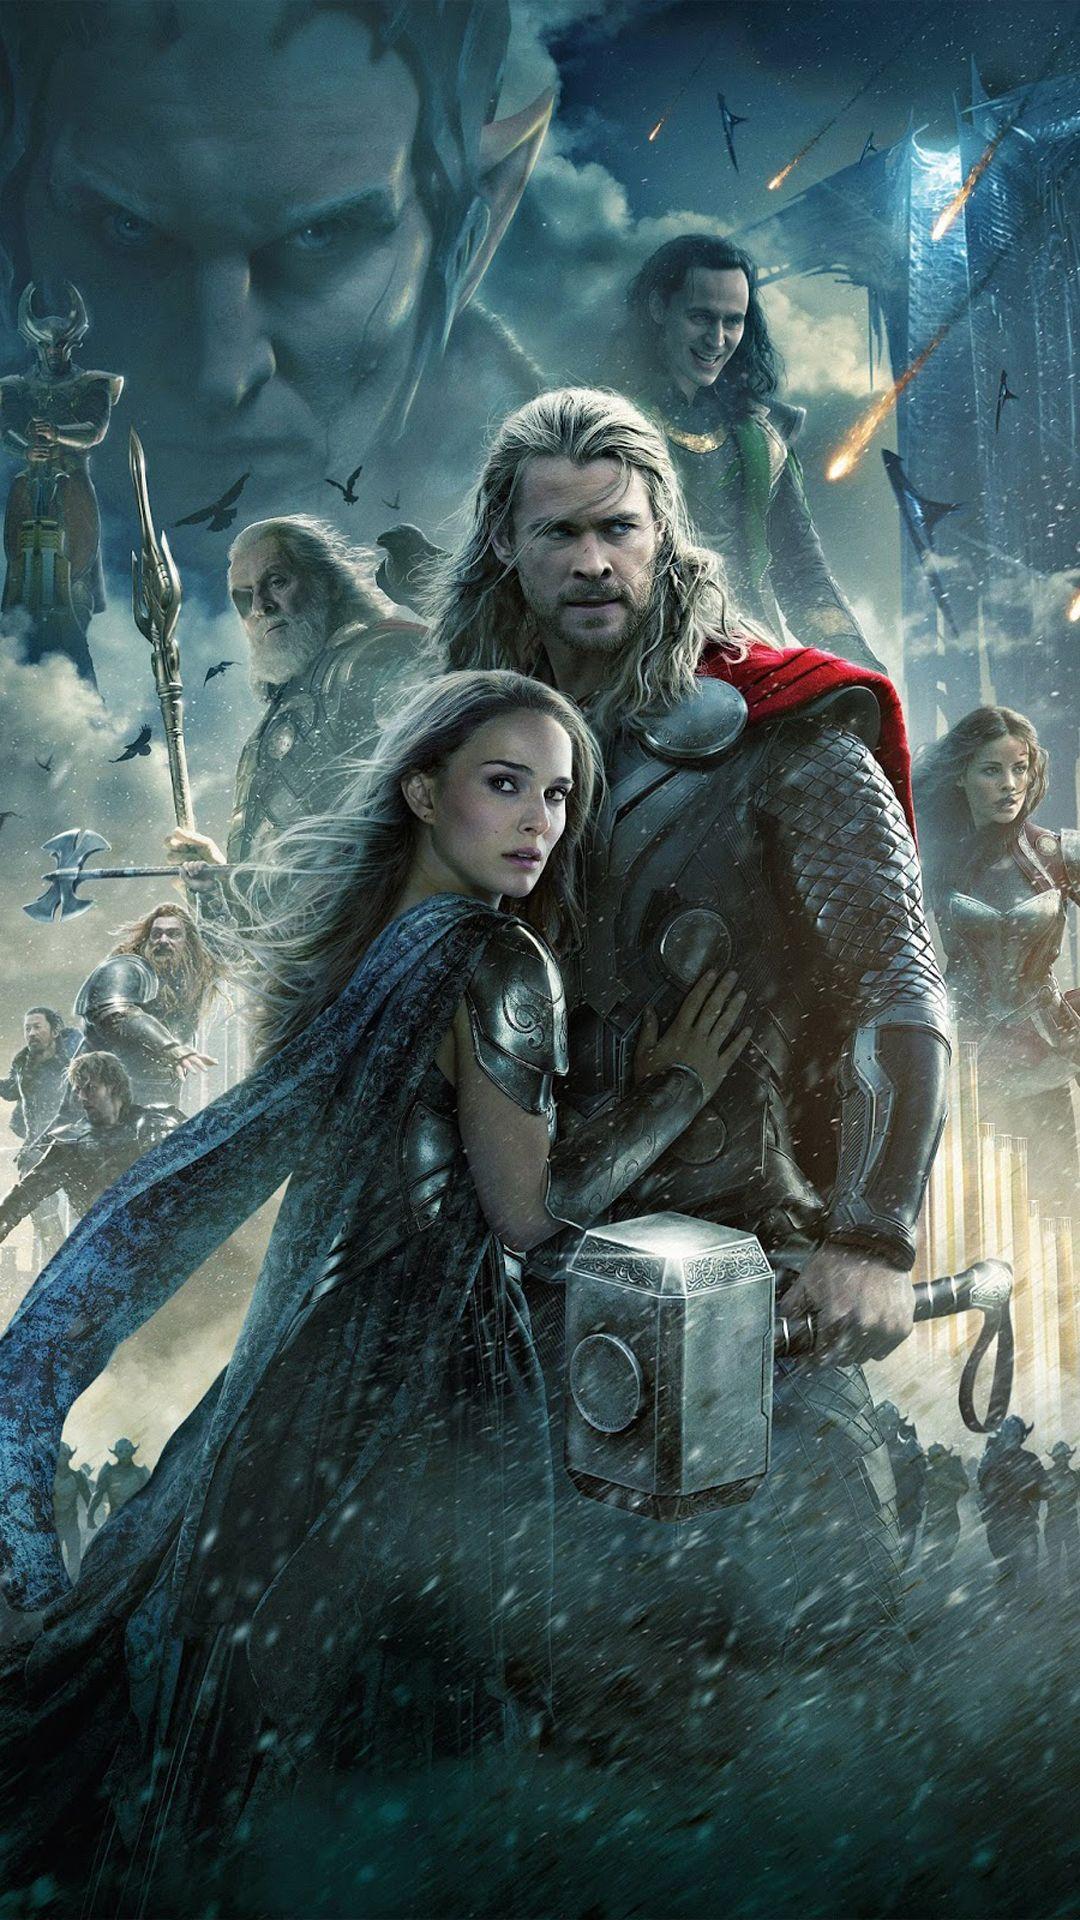 Thor The Dark World htc one wallpaper, free and easy to